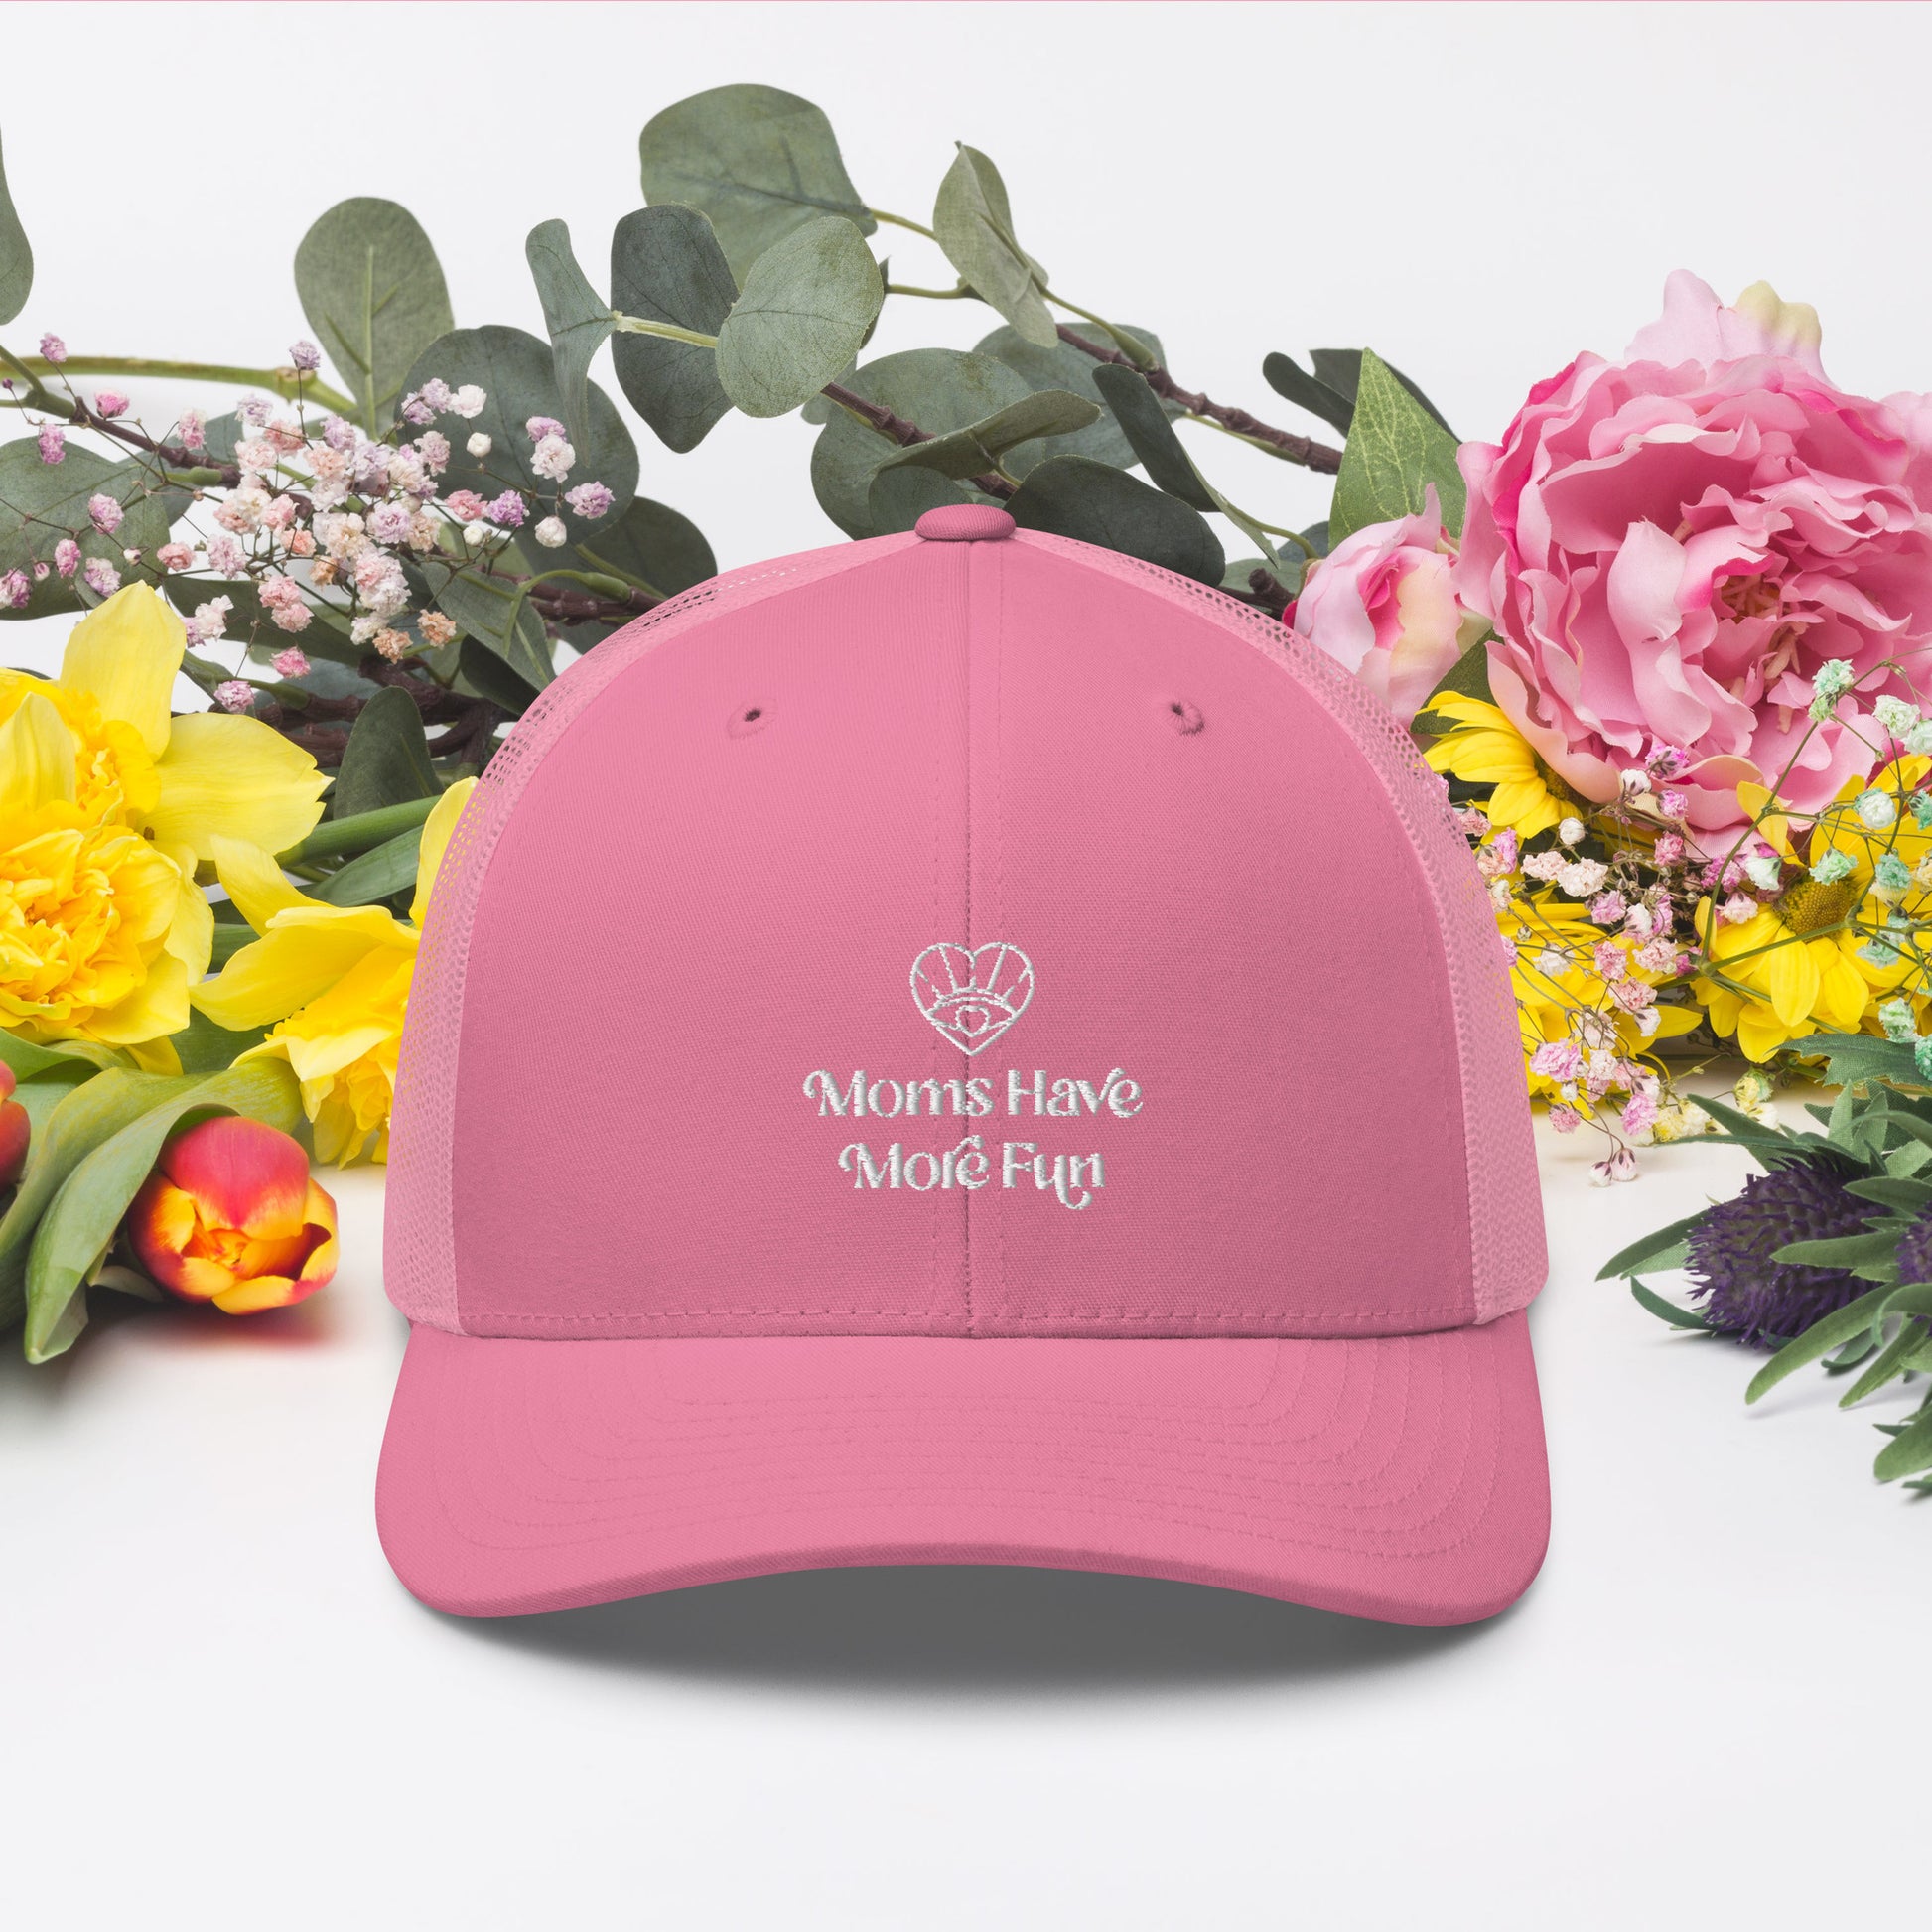 An image of the Moms Have More Fun pink trucker hat, a trendy accessory with a vibrant pink color and the brand logo embroidered on the front